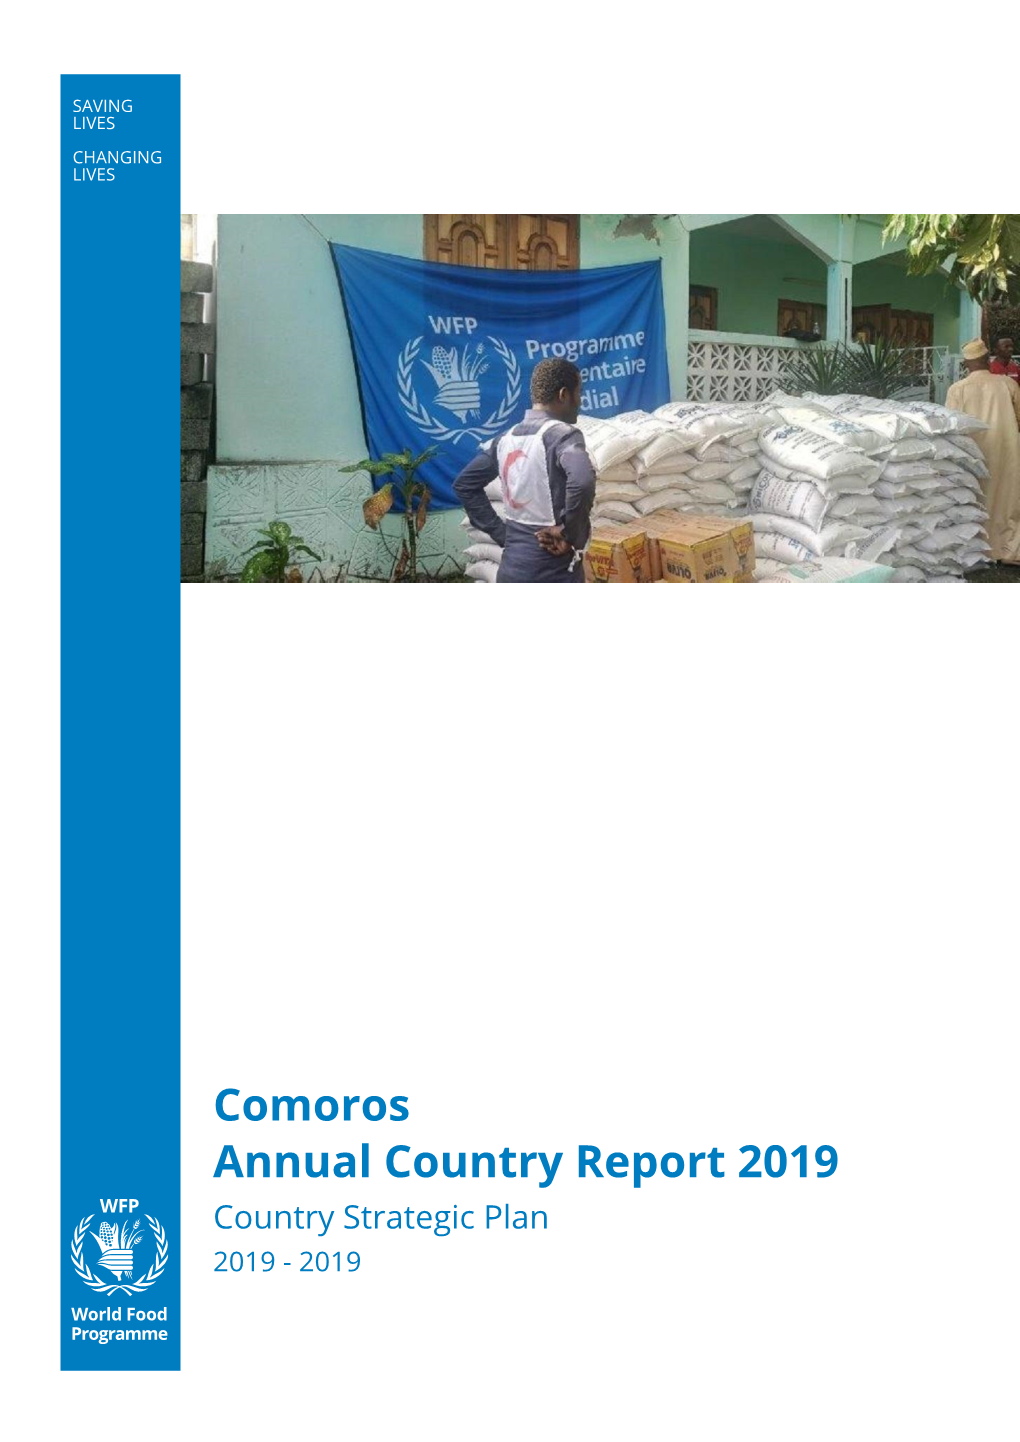 Comoros Annual Country Report 2019 Country Strategic Plan 2019 - 2019 Table of Contents